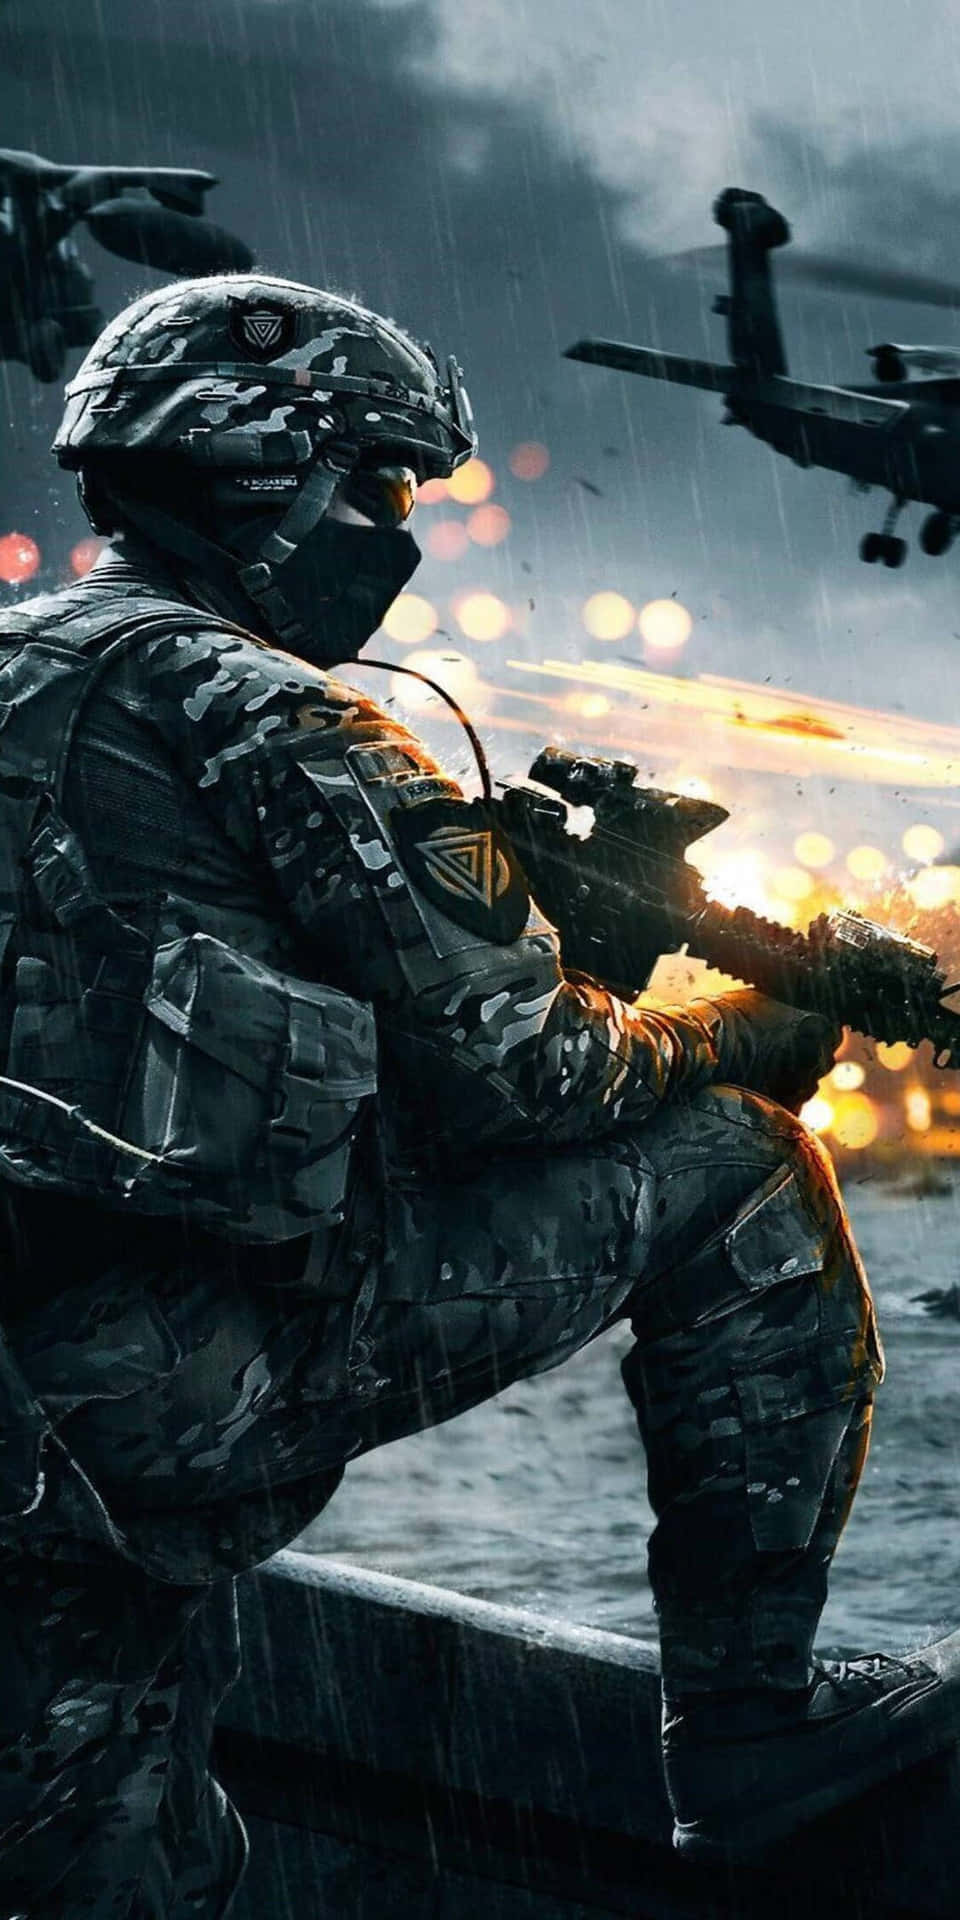 Caption: "Pixel 3 Battlefield 4 - Action-Packed Gaming Background"